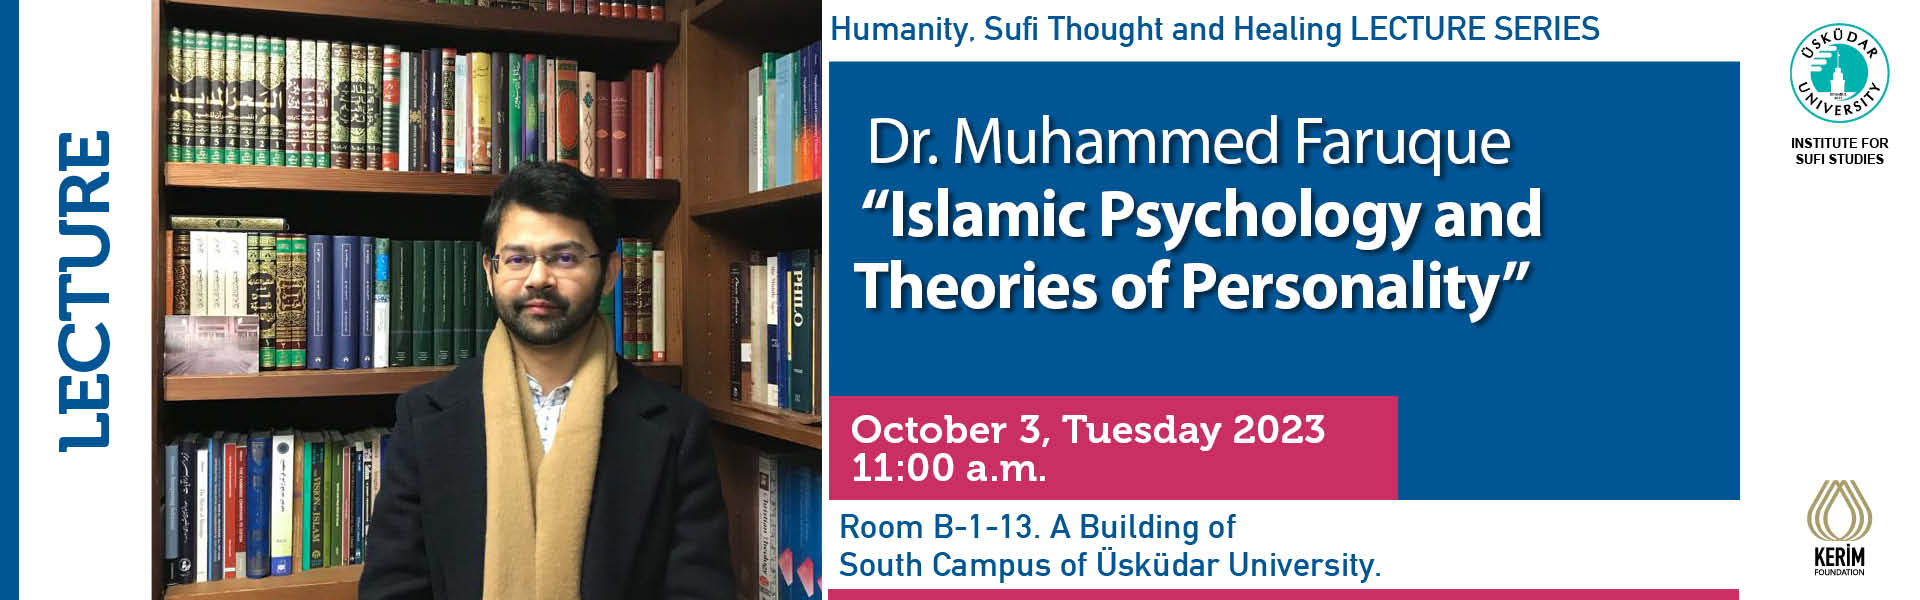 The Institute for Sufi Studies, Humanity, Sufi Thought and Healing Lecture Series